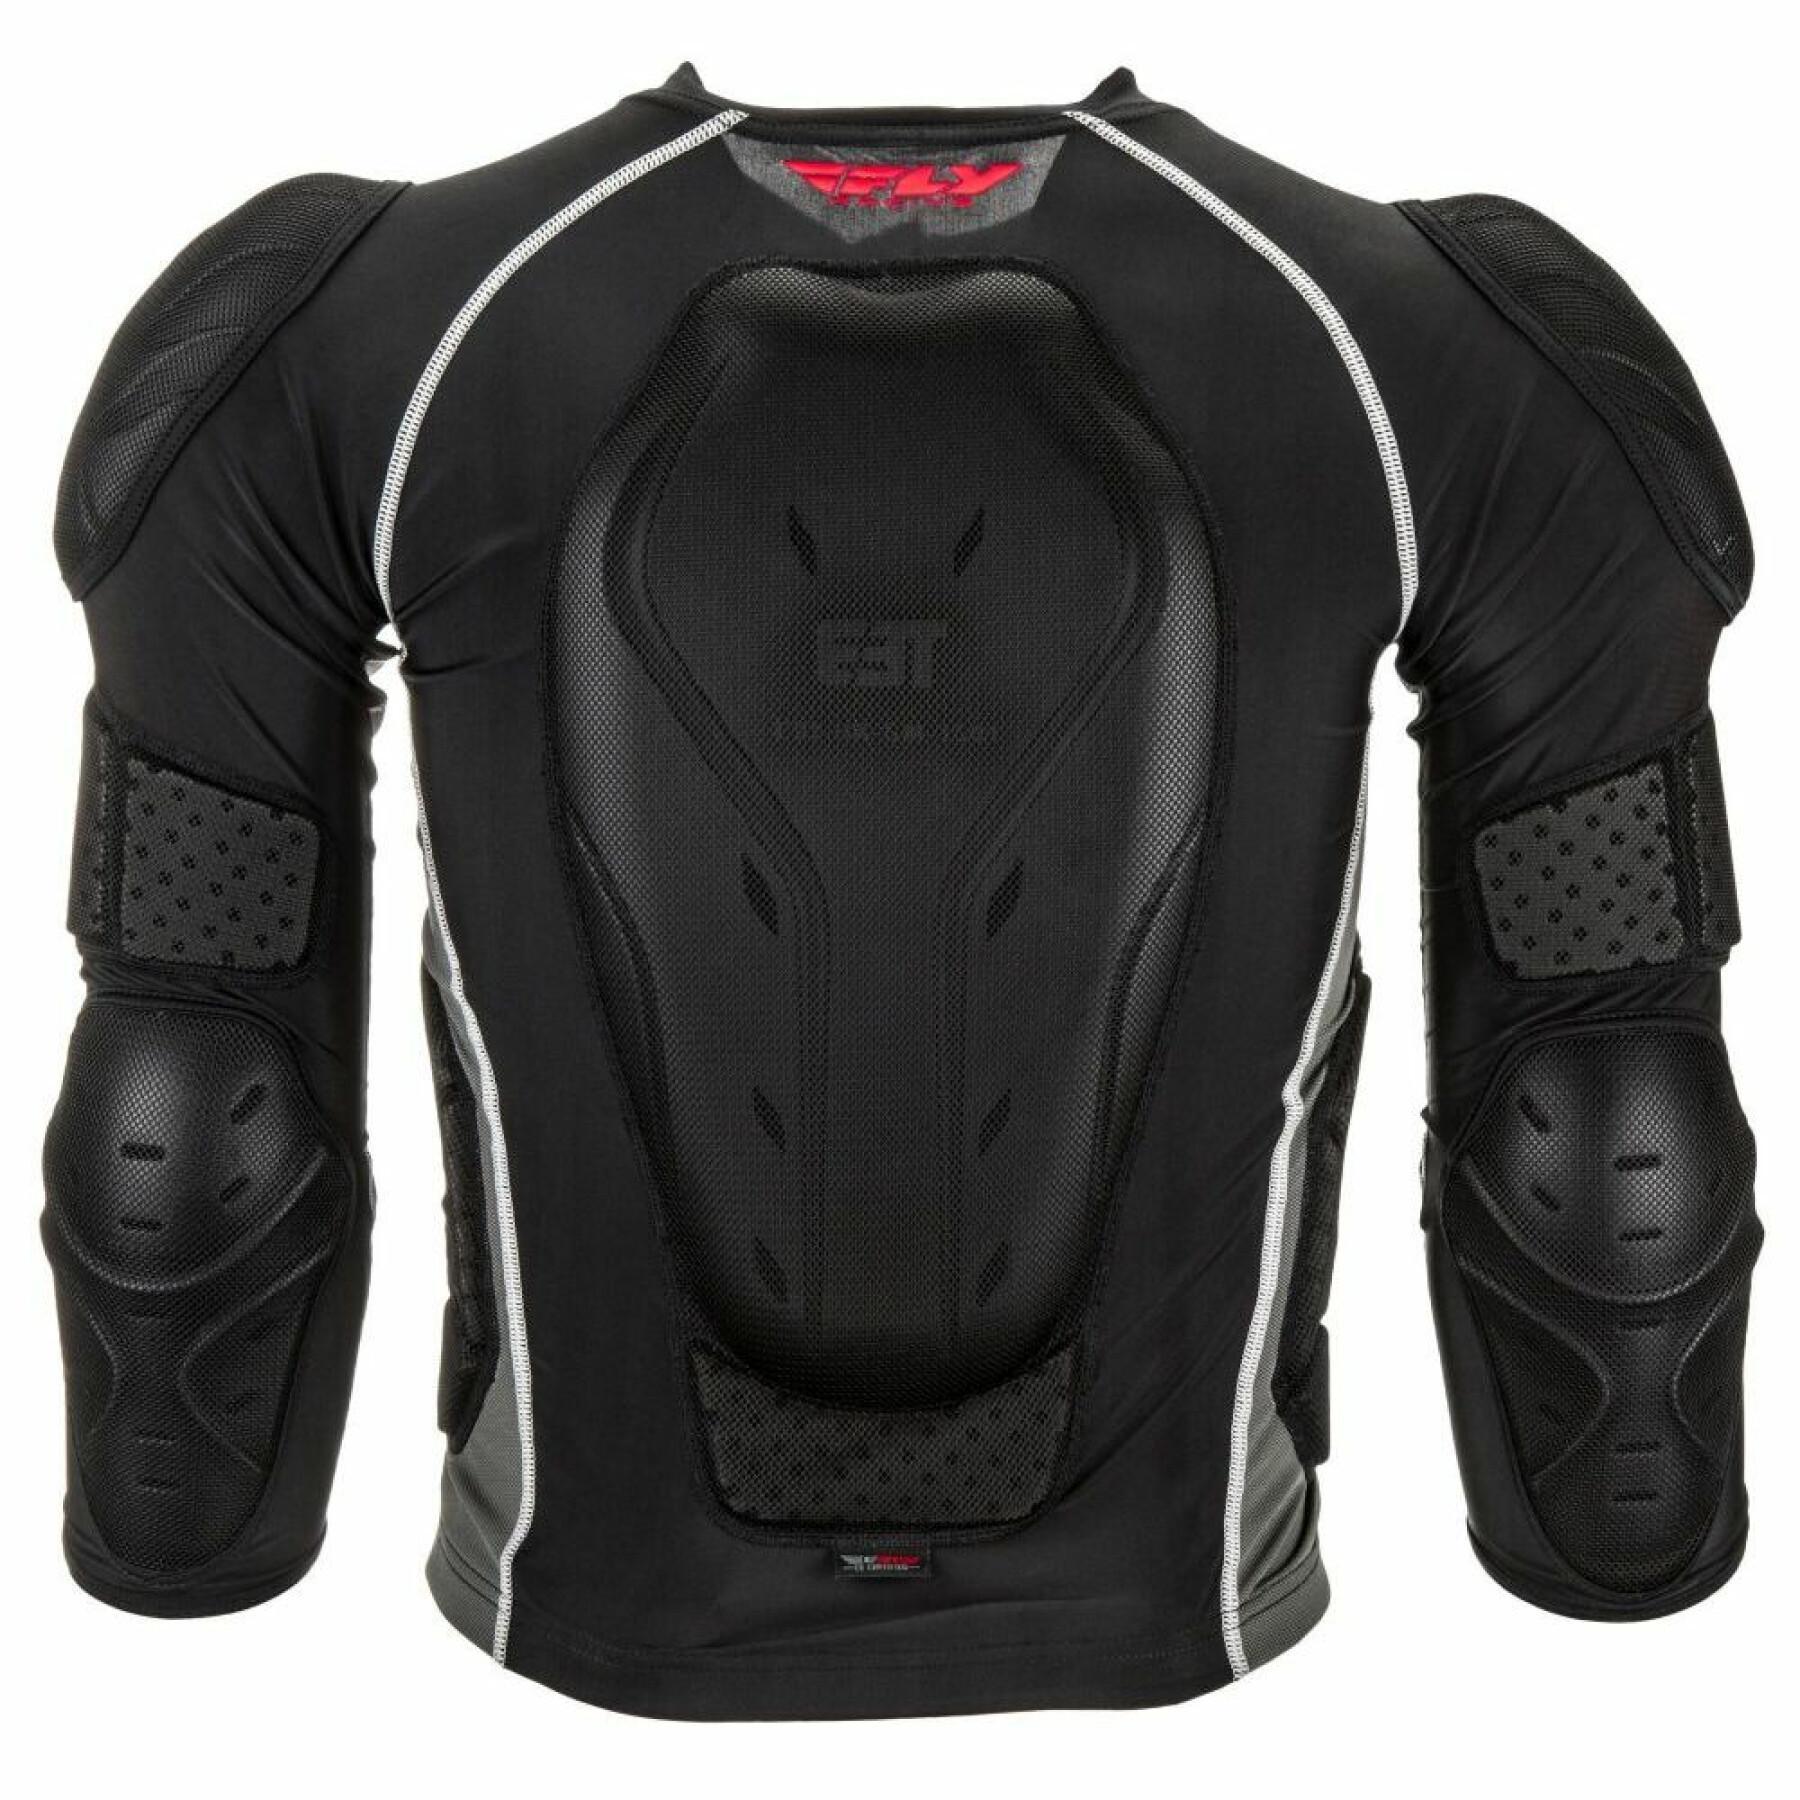 Protective vest Fly Racing Barricade